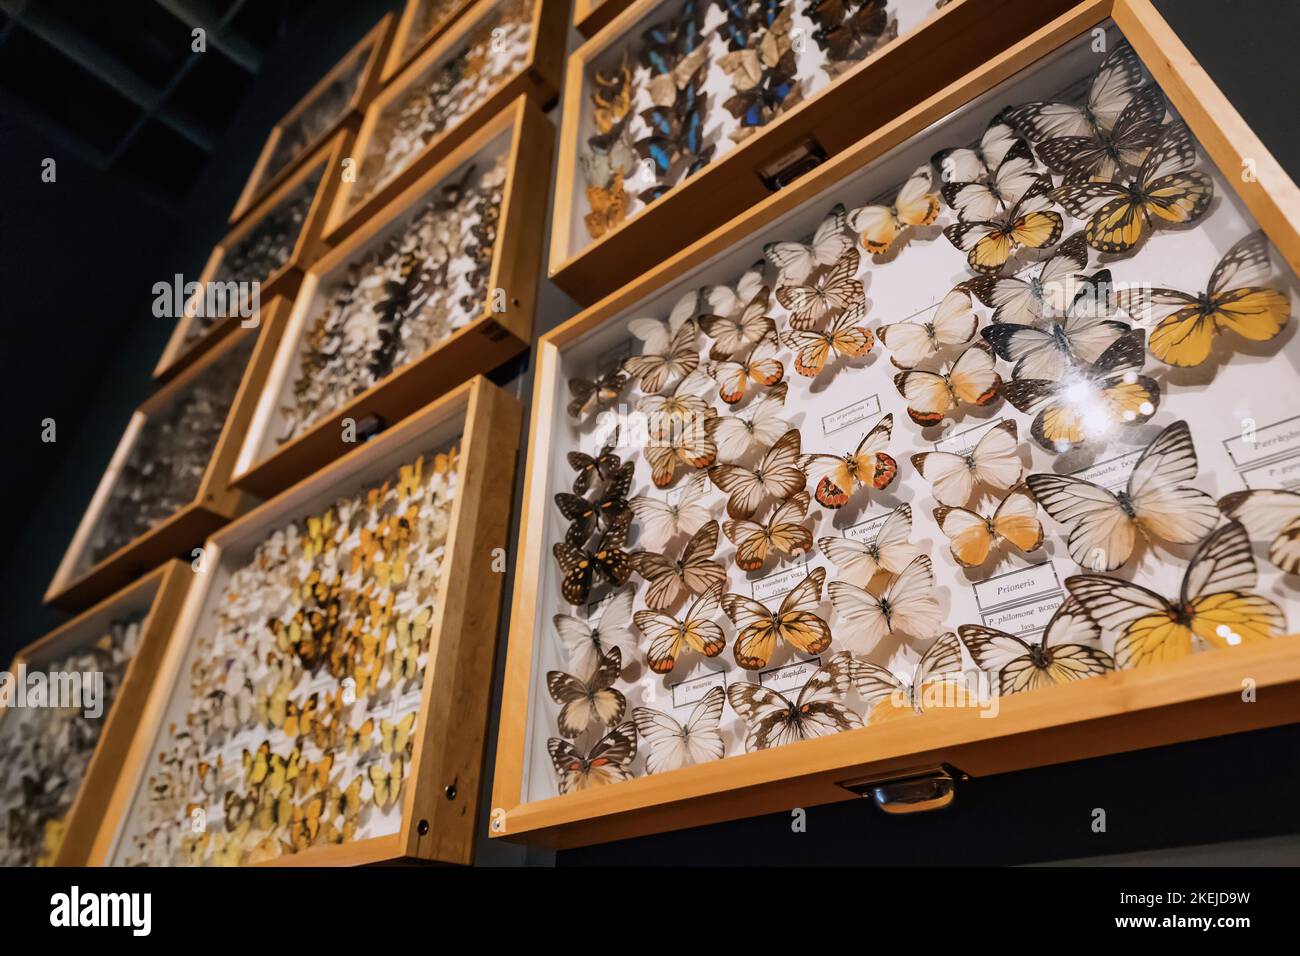 26 July 2022, Munster, Germany: Butterfly collection on display at the museum, entomology and hobby concept Stock Photo